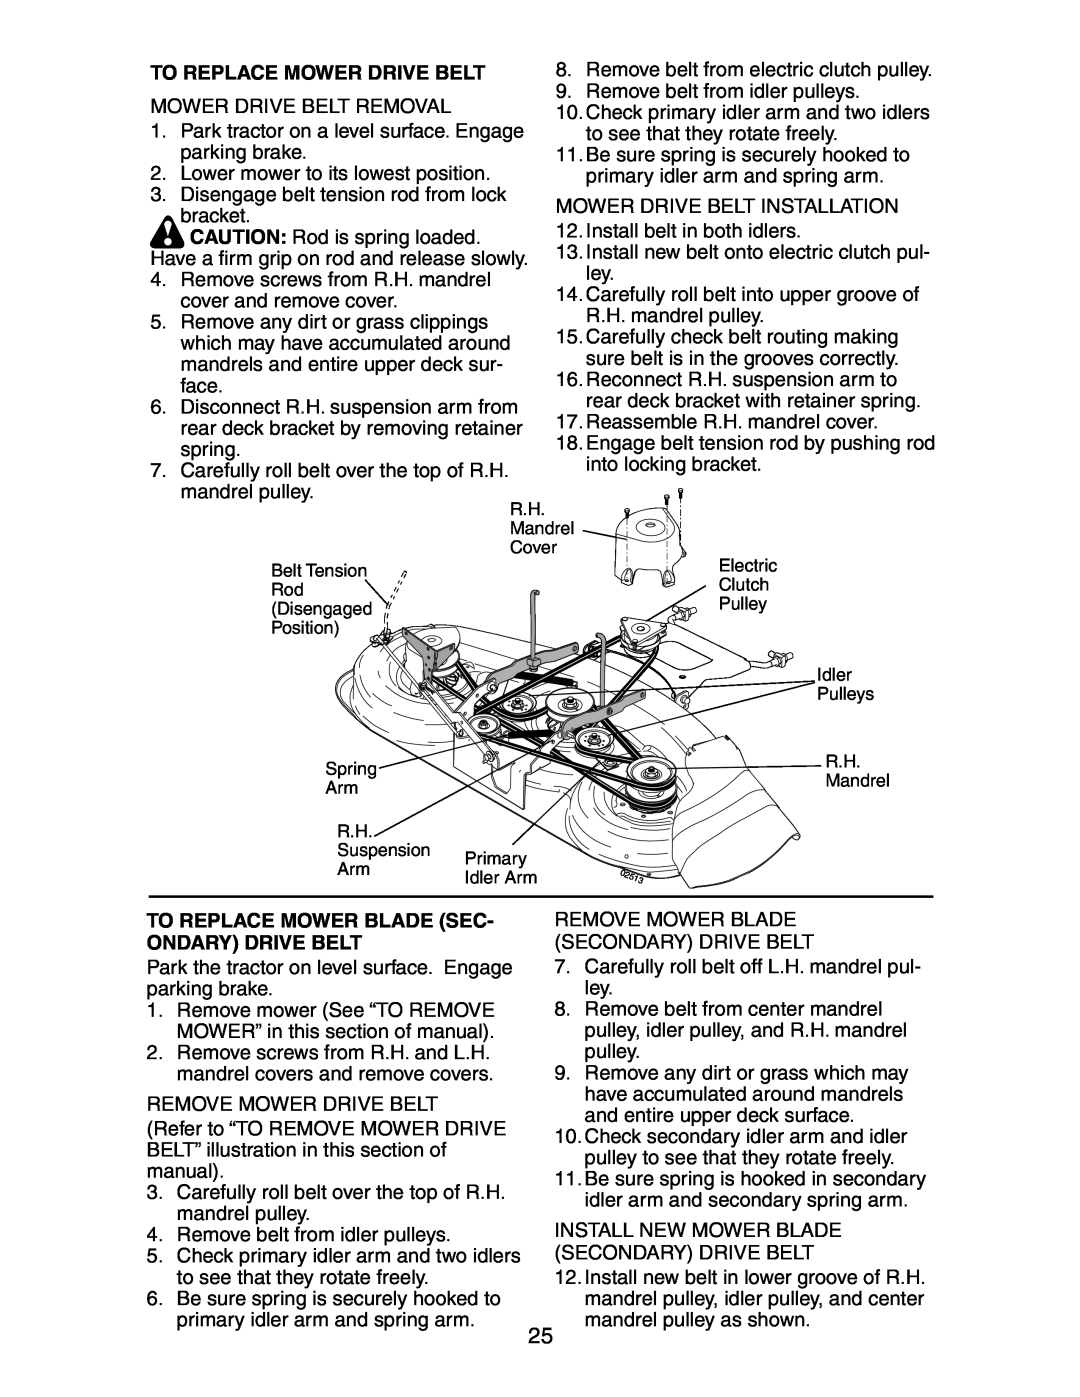 Poulan COGT22H48A manual To Replace Mower Drive Belt, To Replace Mower Blade Sec- Ondary Drive Belt 